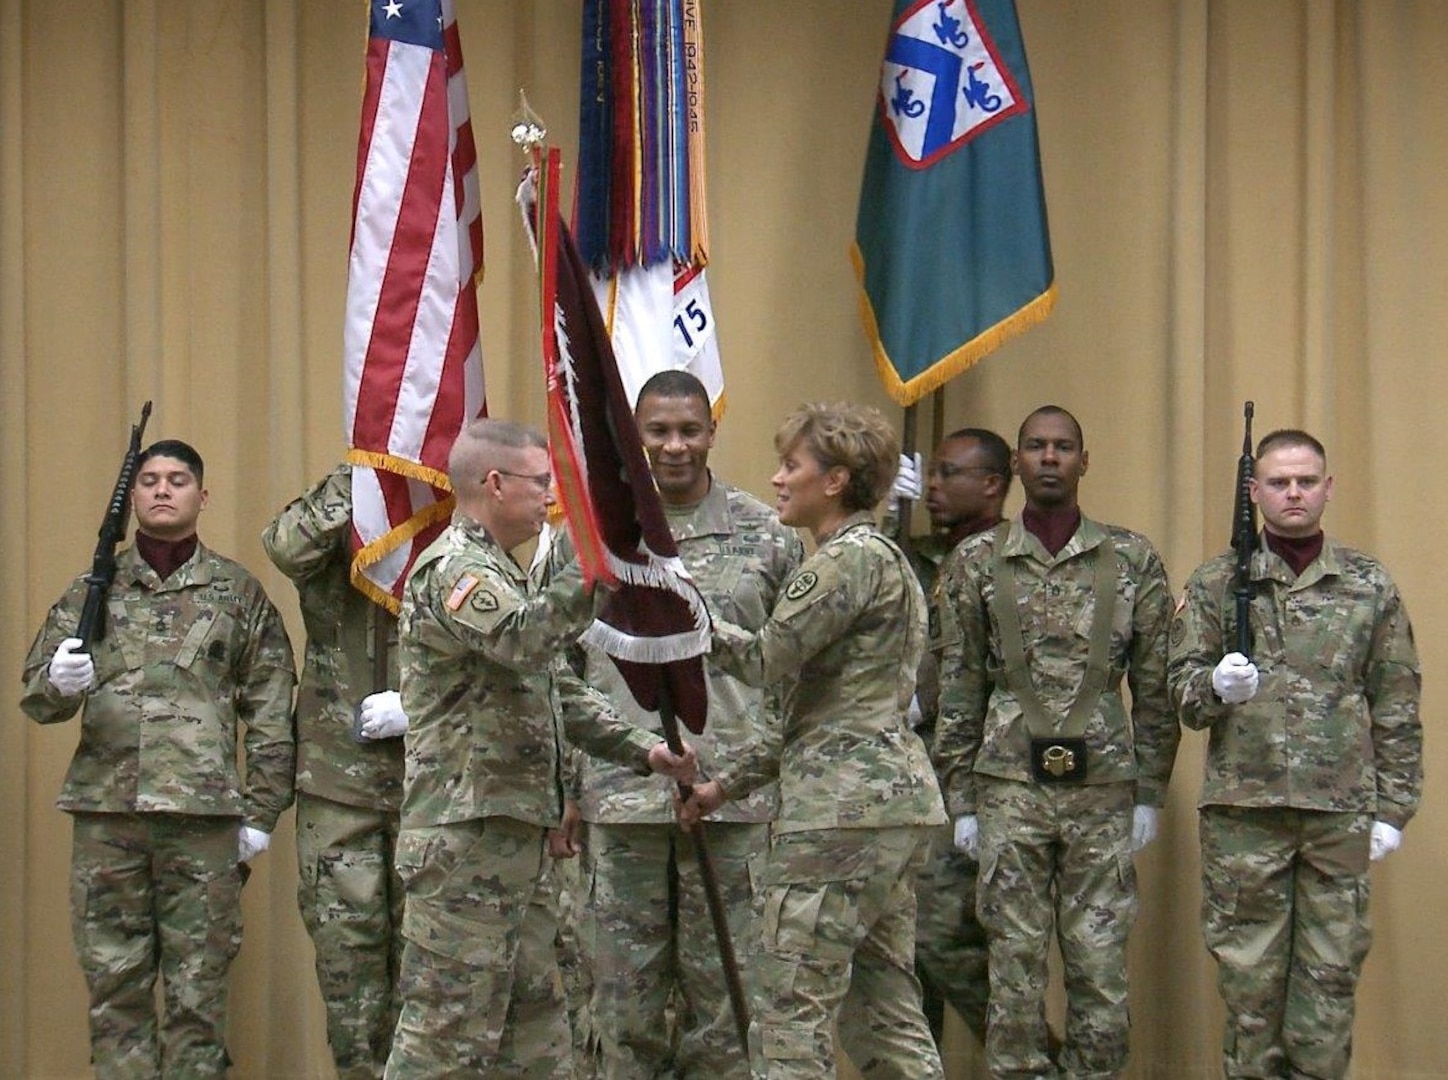 Lt. Gen. Nadja Y. West, The Surgeon General of the U.S. Army and commander, Army Medical Command (right), passes the colors to Lt. Gen. Michael D. Lundy, Commander, Combined Arms Center and Fort Leavenworth, Kansas, while Maj. Gen. Patrick D. Sargent, commanding general, the AMEDDC&S HRCoE (center), looks on.